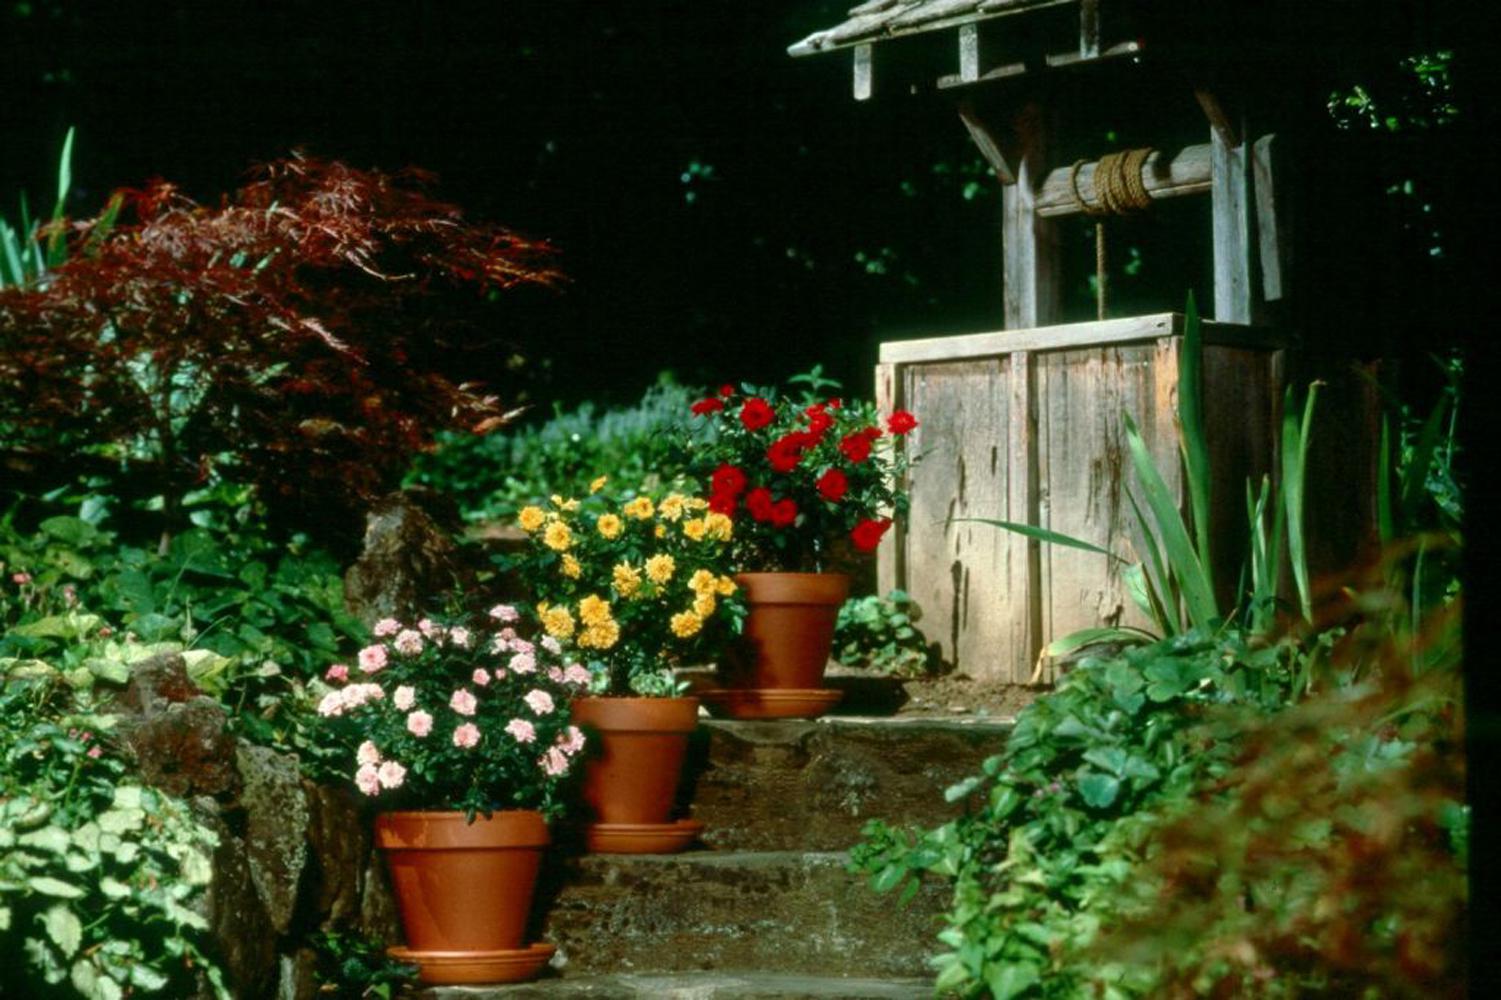 Containers may be the perfect place for small, manageable flower gardens. Stair-stepping containers at the home's entryway will make visitors feel welcome.